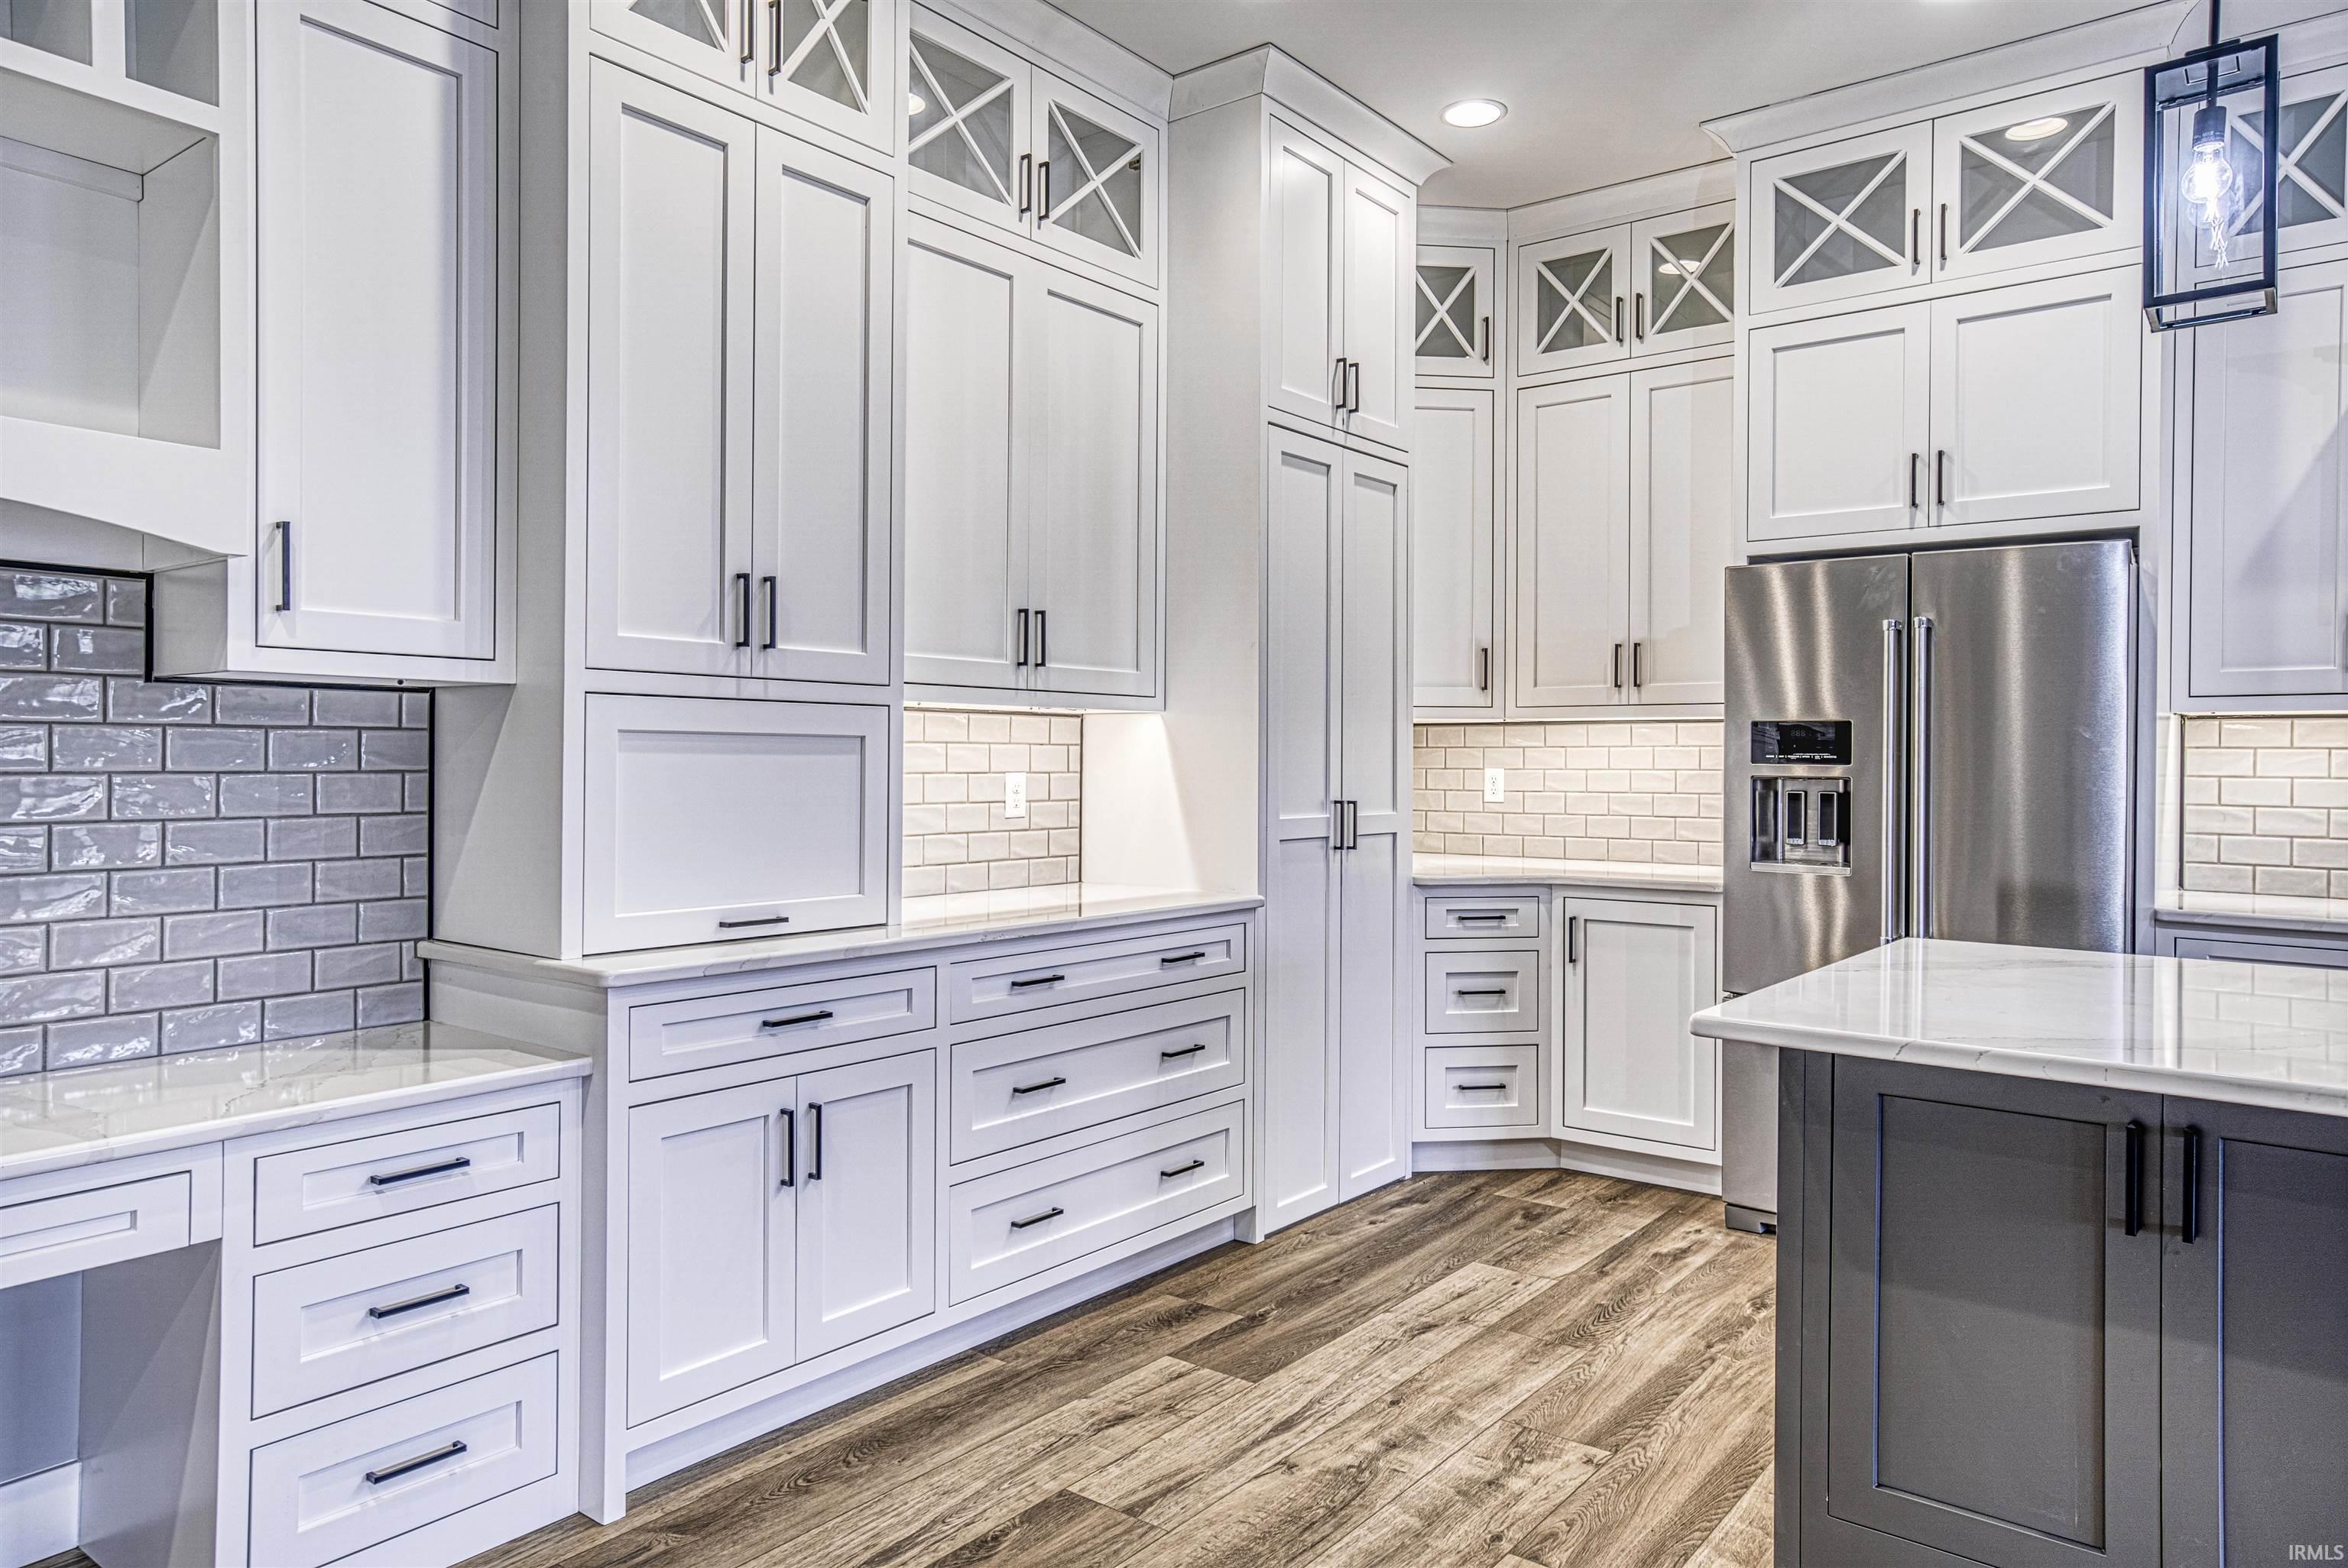 An abundance of custom cabinetry with several built-in features...